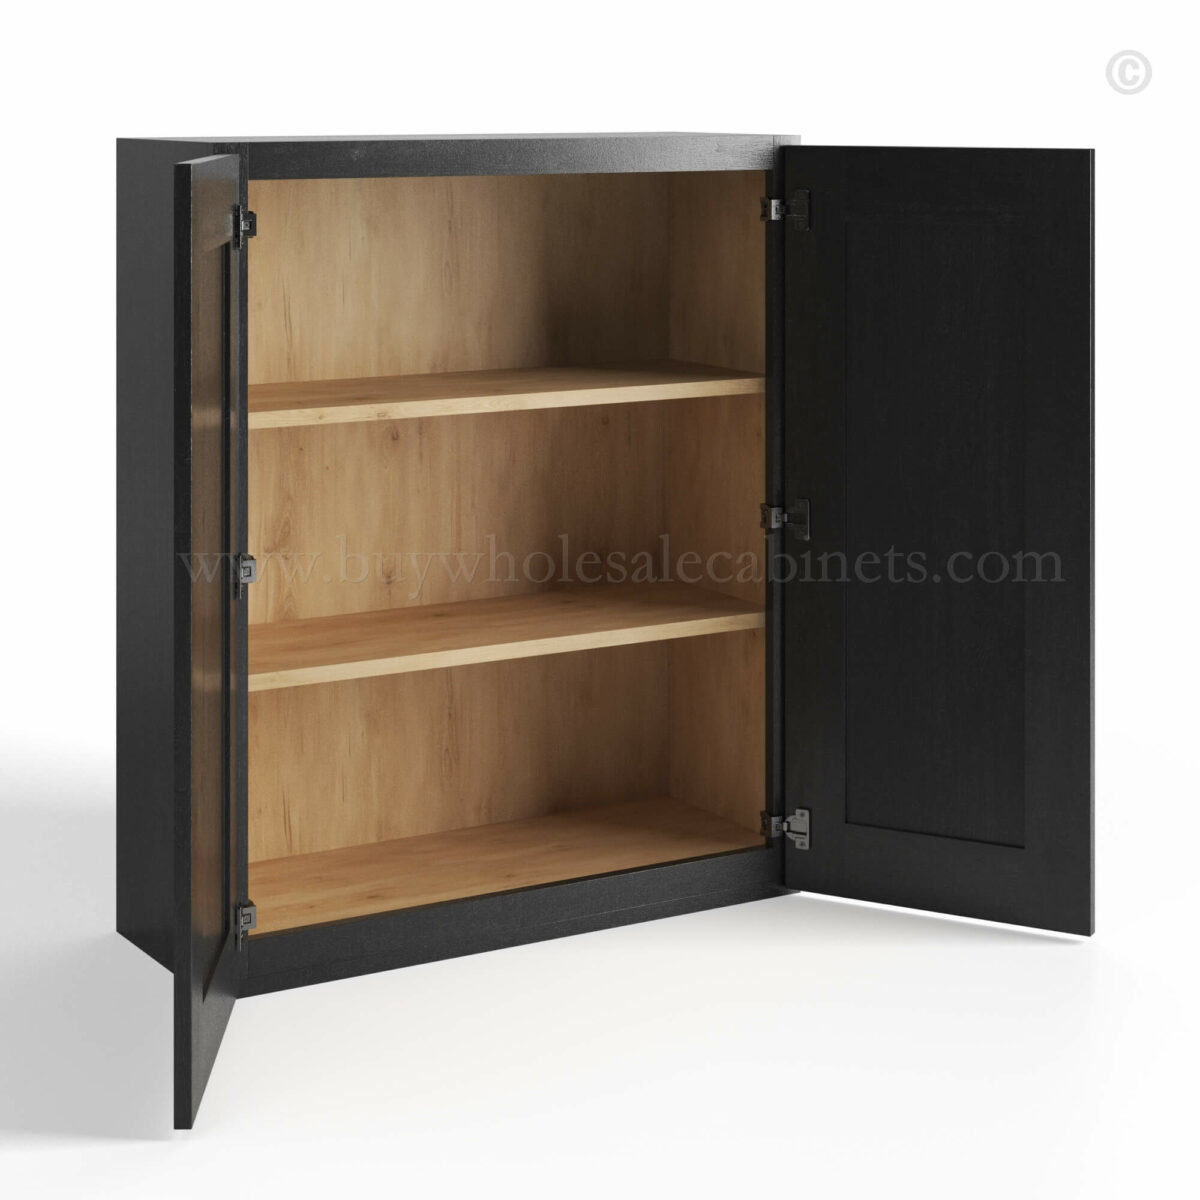 charcoal black shaker wall cabinets 36 H with two doors,  rta cabinets, wholesale cabinets